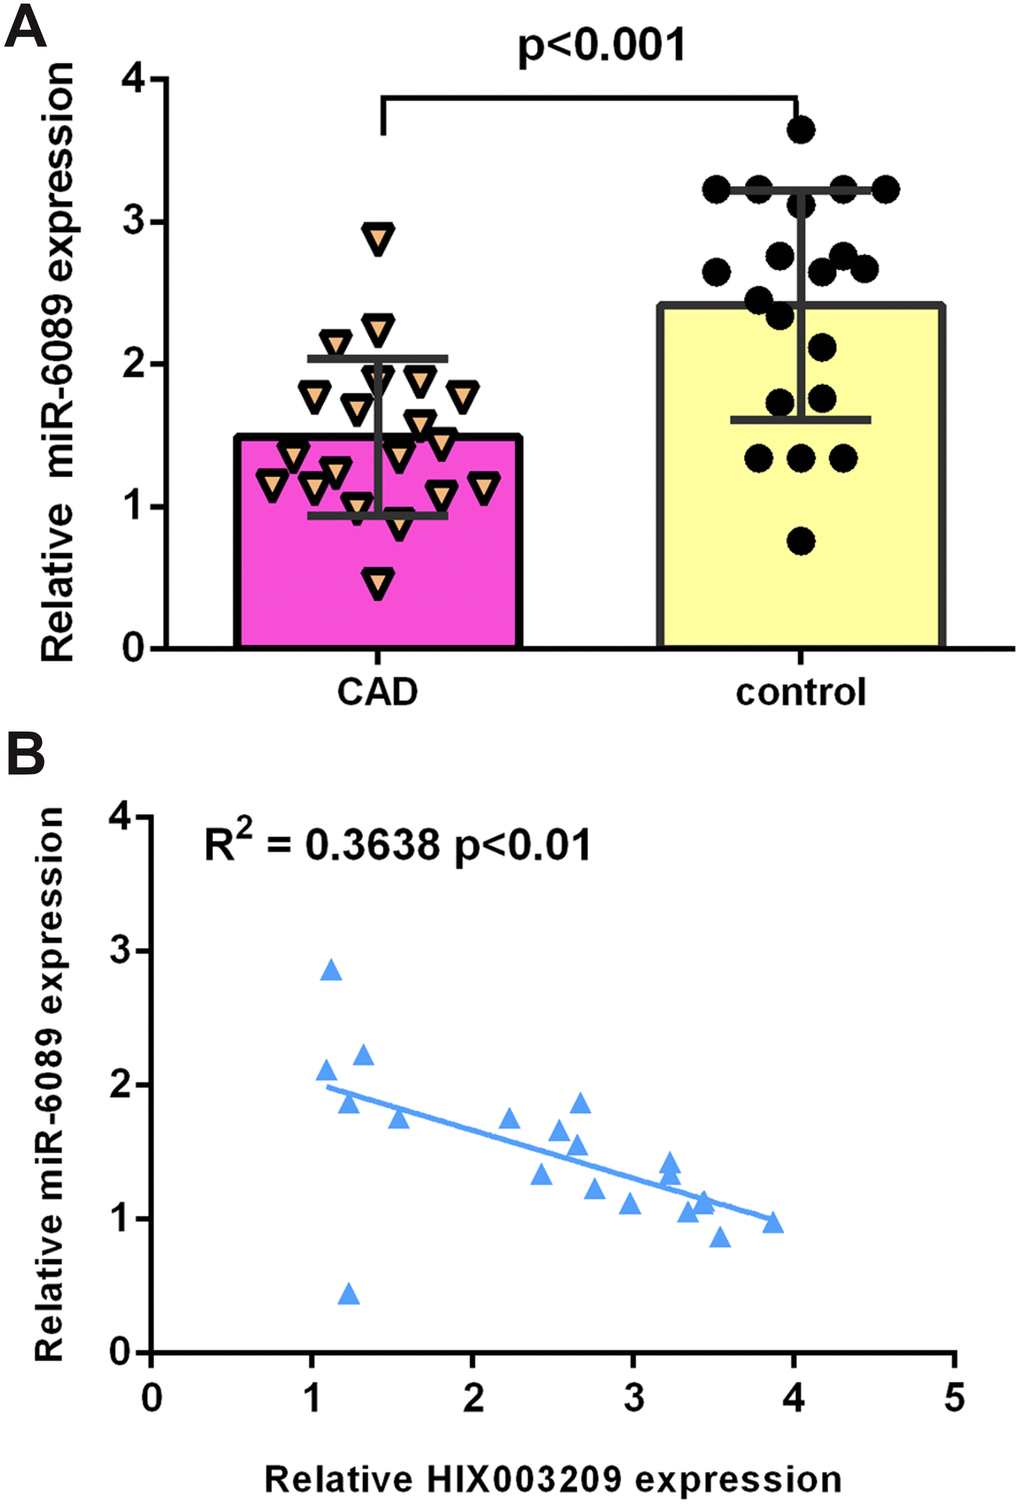 miR-6089 expression was downregulated in CAD. (A) The expression of miR-6089 was decreased in atherosclerotic coronary tissues compared to normal coronary artery samples. (B) There is a negative association between expression of HIX003209 and miR-6089 in atherosclerotic coronary tissues. U6 was used as internal control.